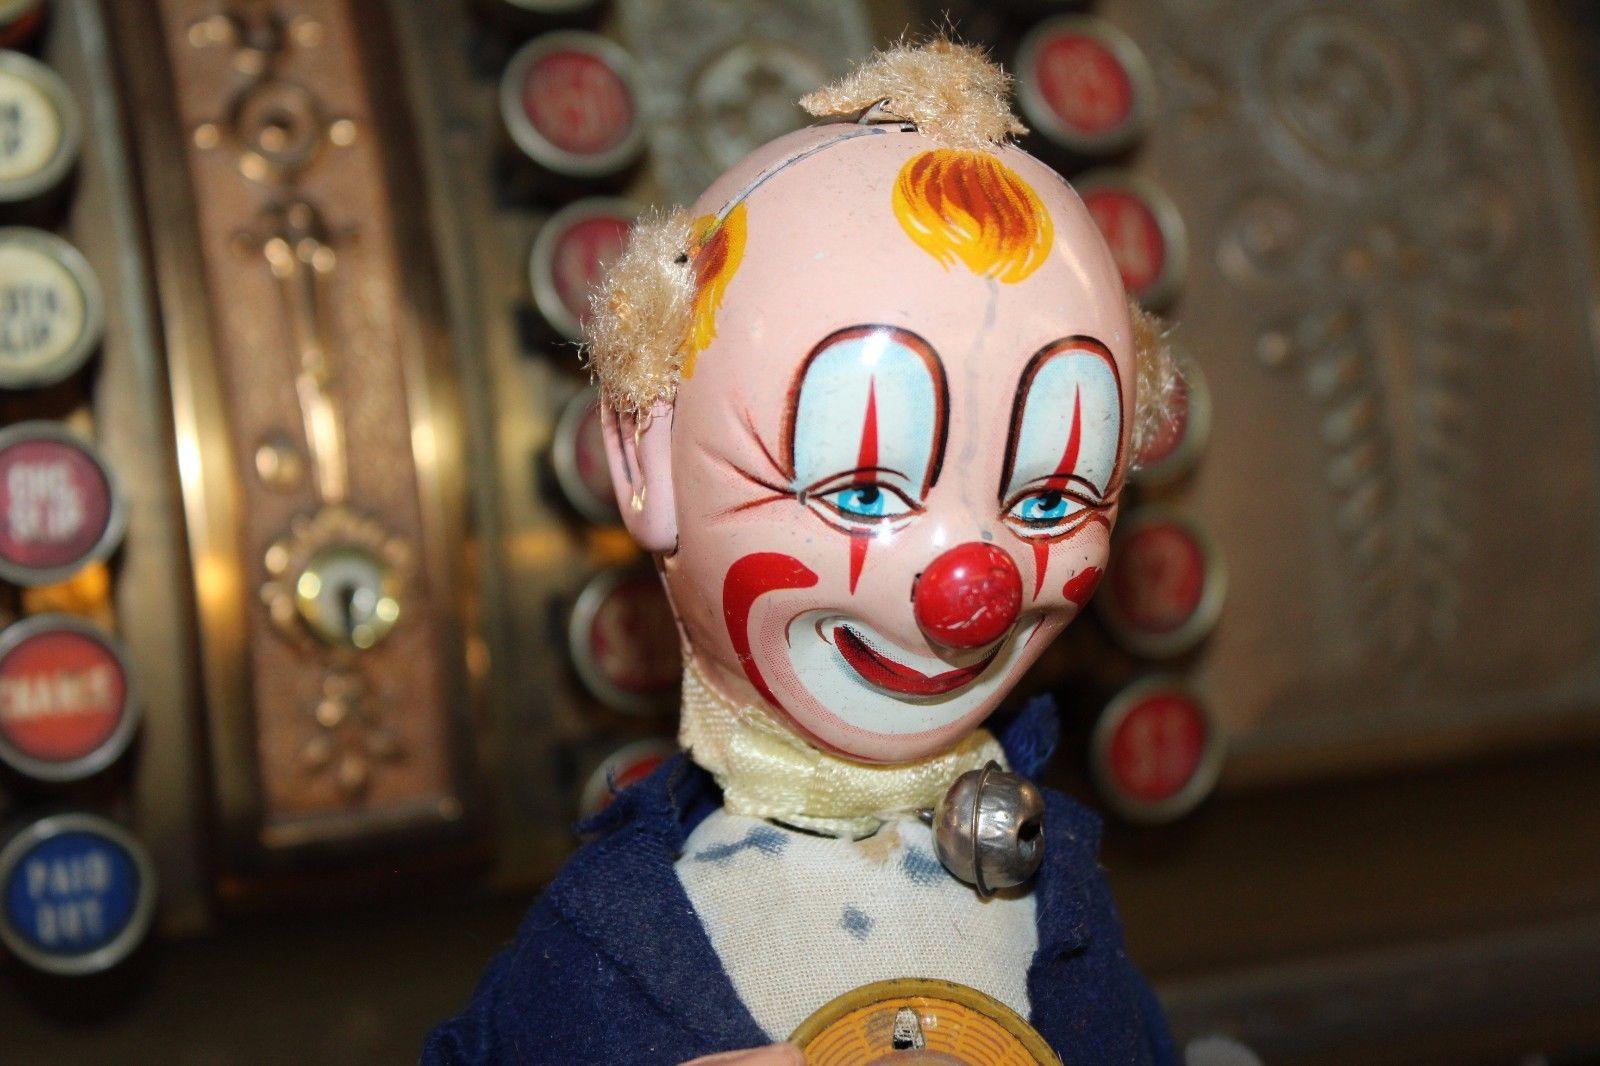 For your consideration we have a vintage Litho Tin Toy - Smiling Sam the carnival man clown wind up mechanical toy bobble head.